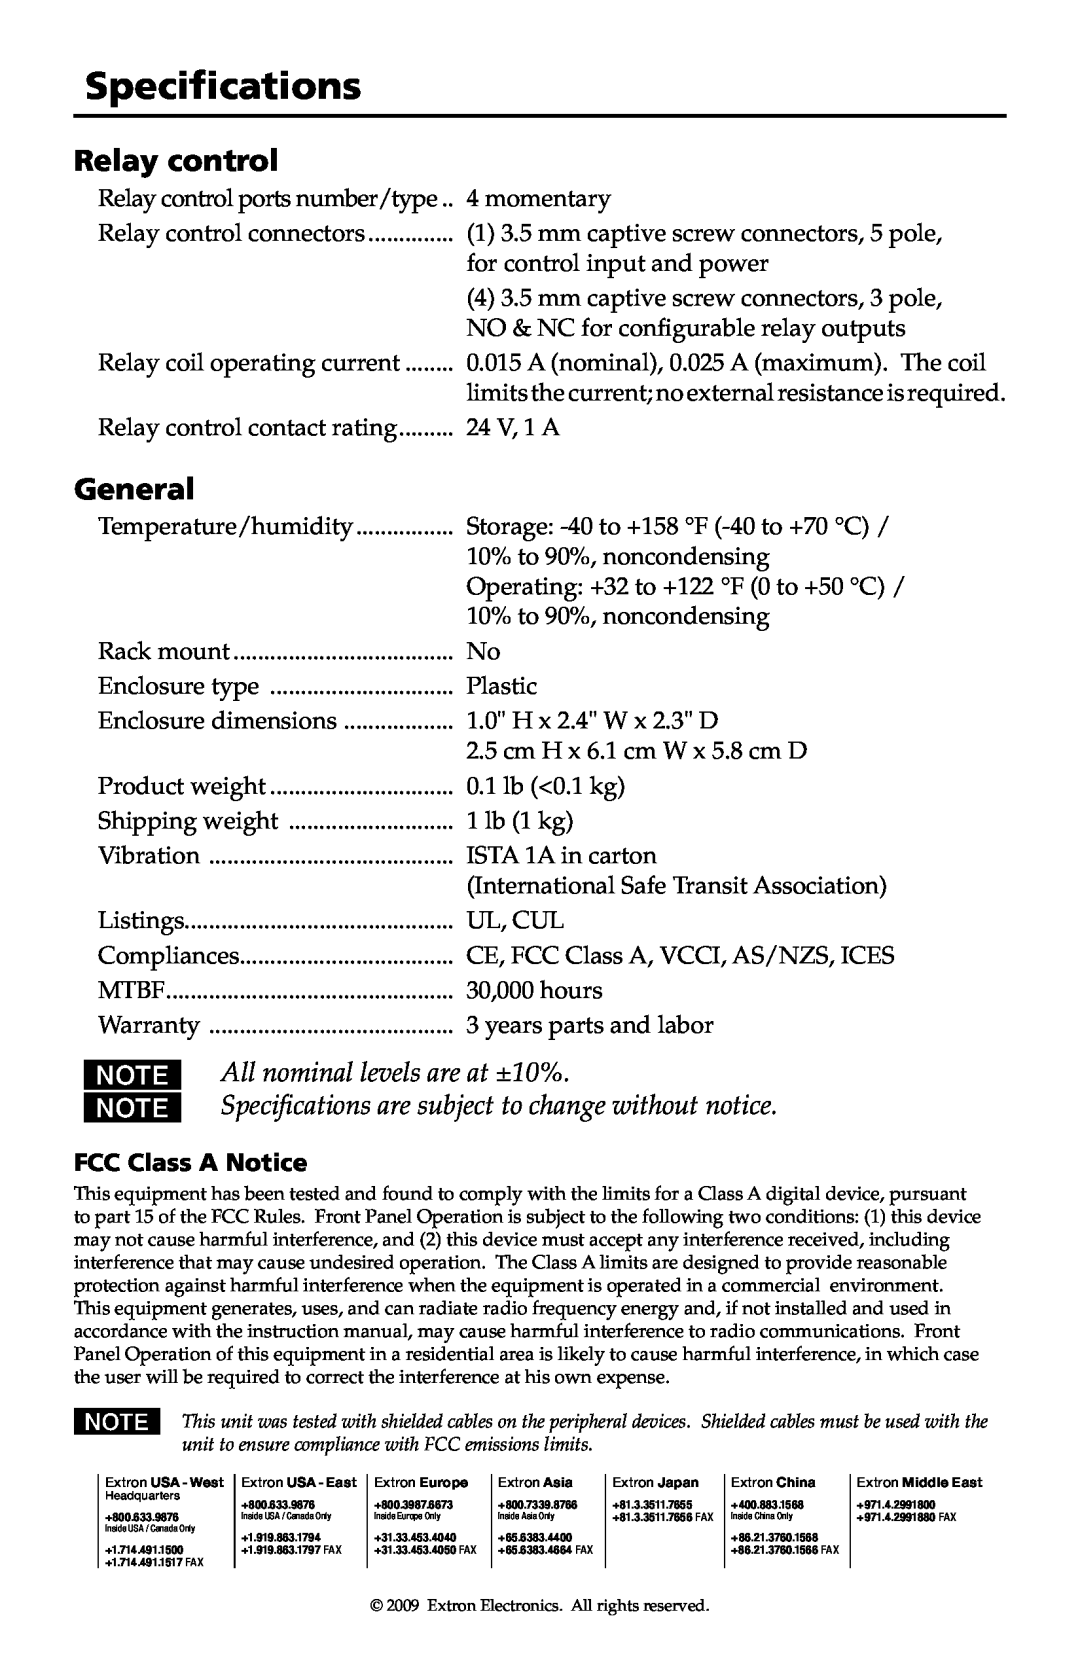 Extron electronic IPA T RLY4 Specifications, Relay control, General, N All nominal levels are at ±10%, FCC Class A Notice 